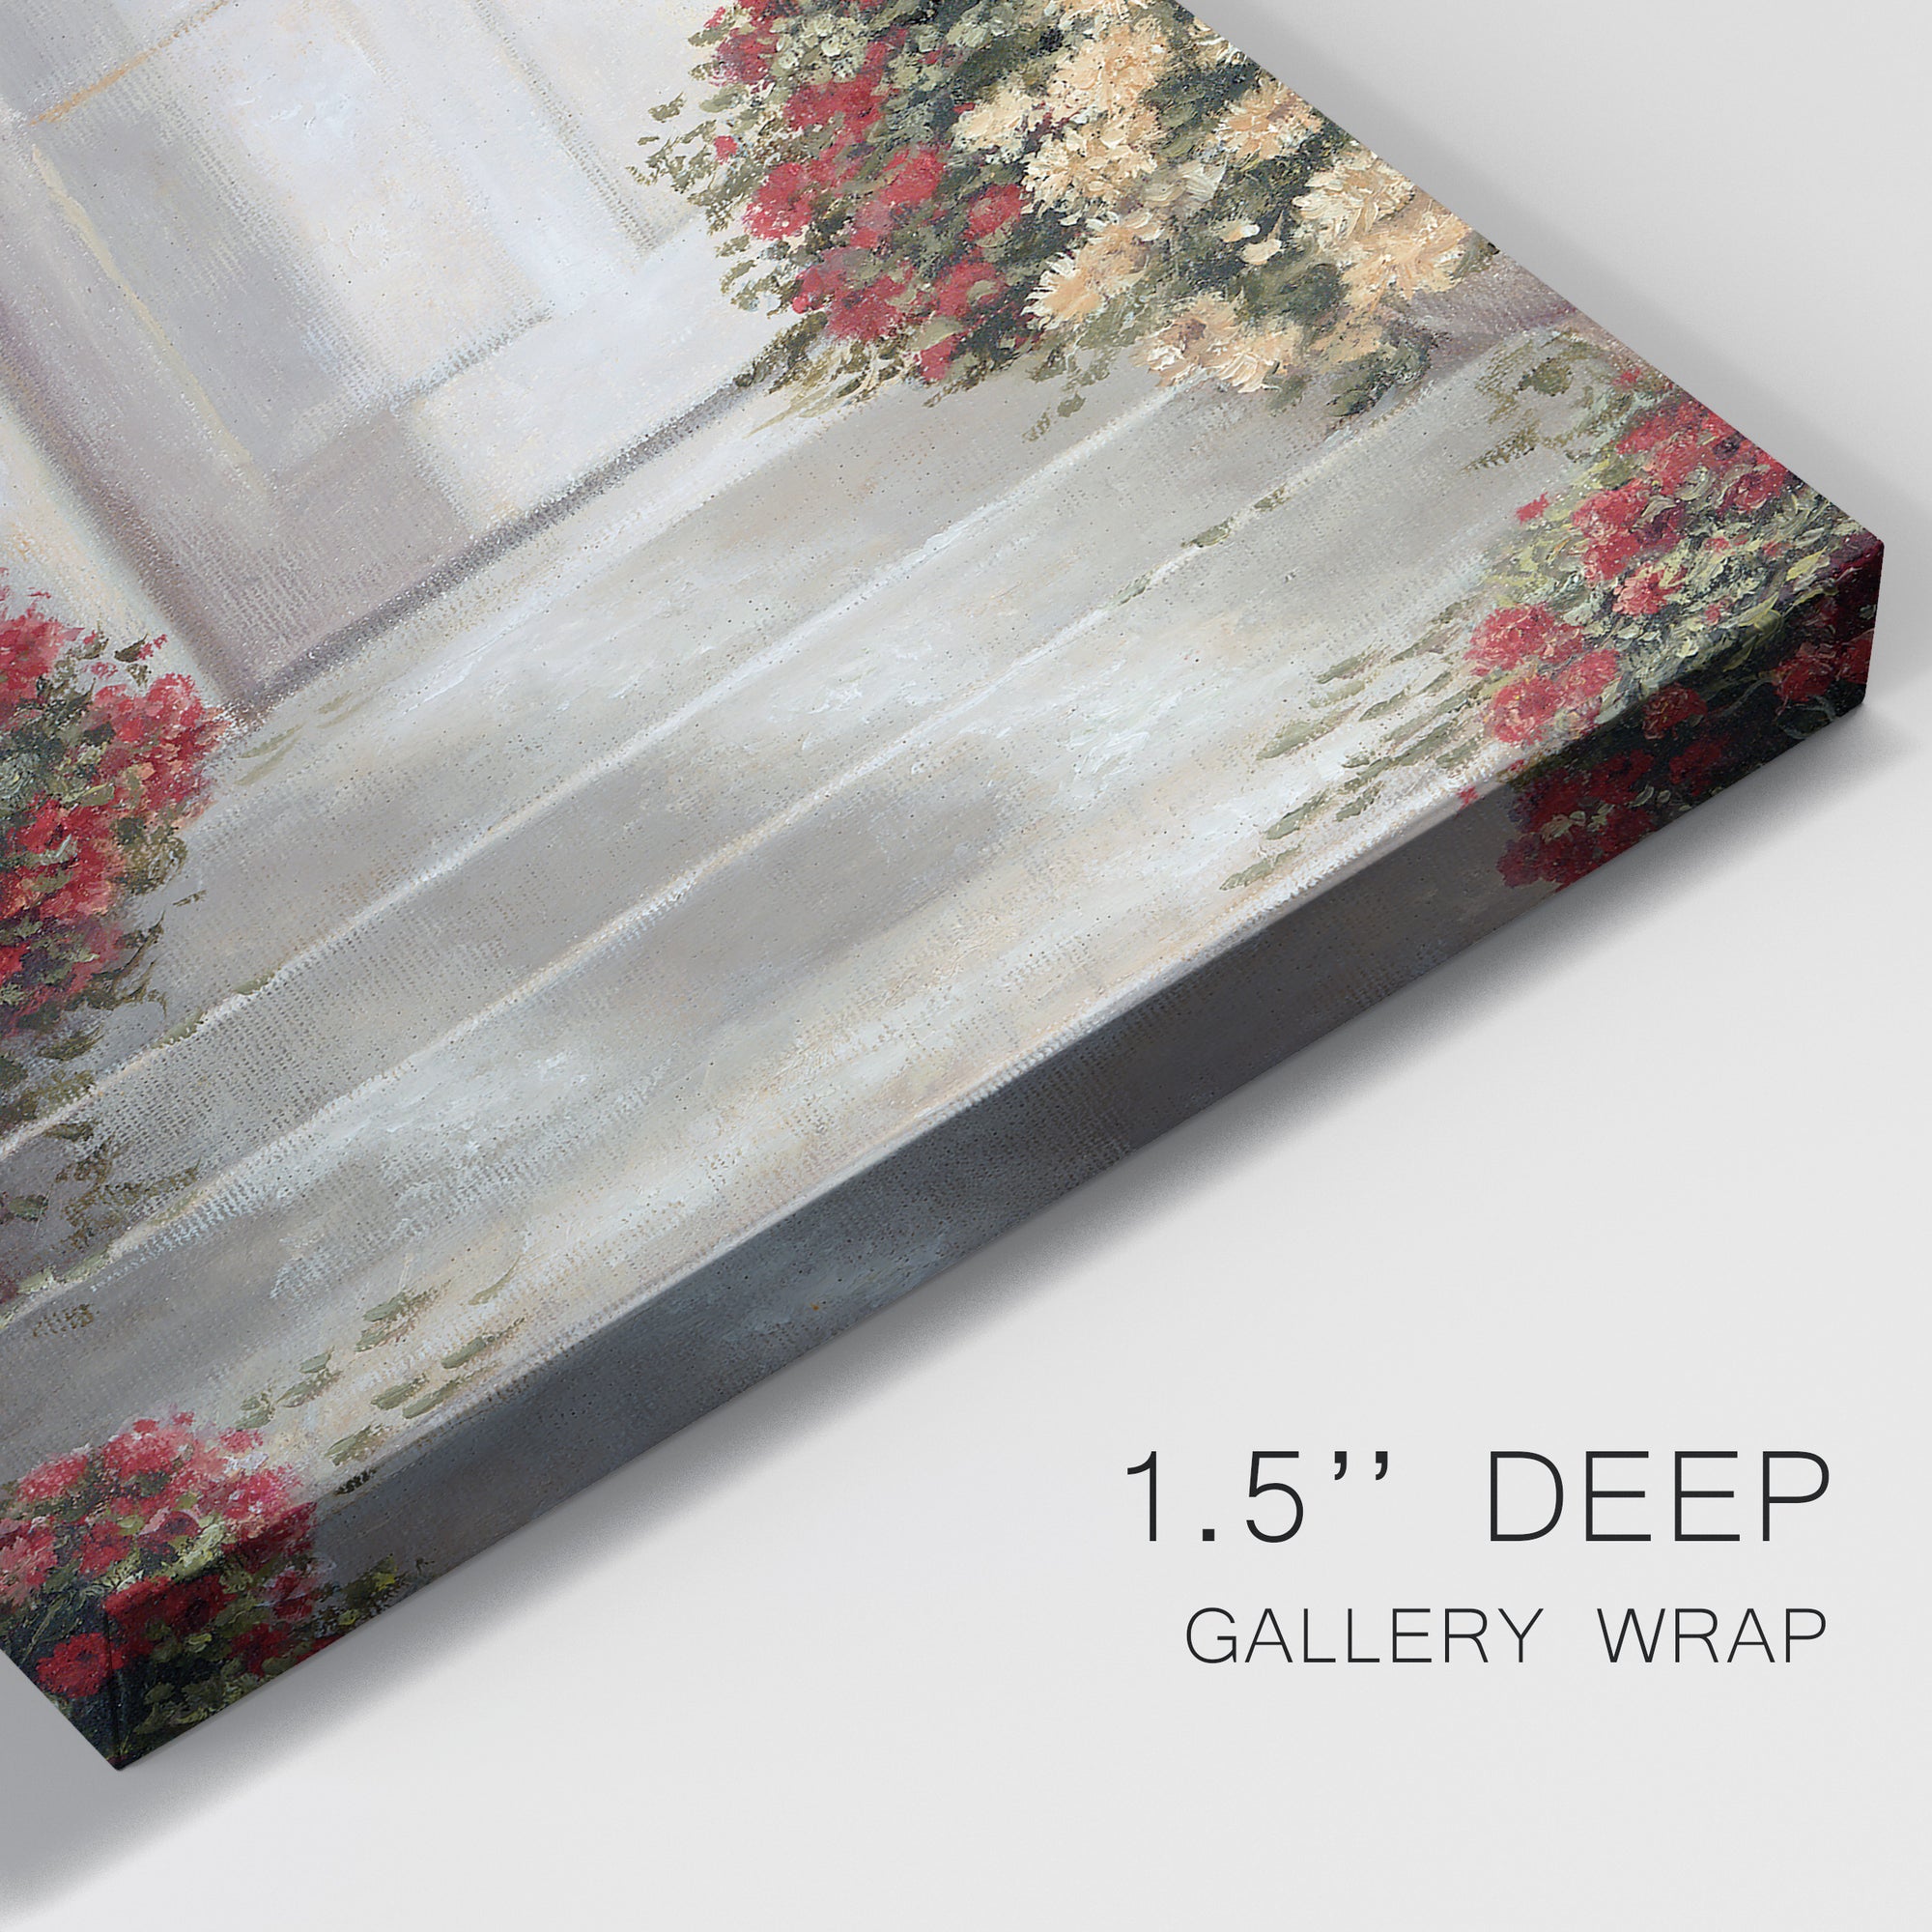 Bumble Bee Garden II - Premium Gallery Wrapped Canvas - Ready to Hang